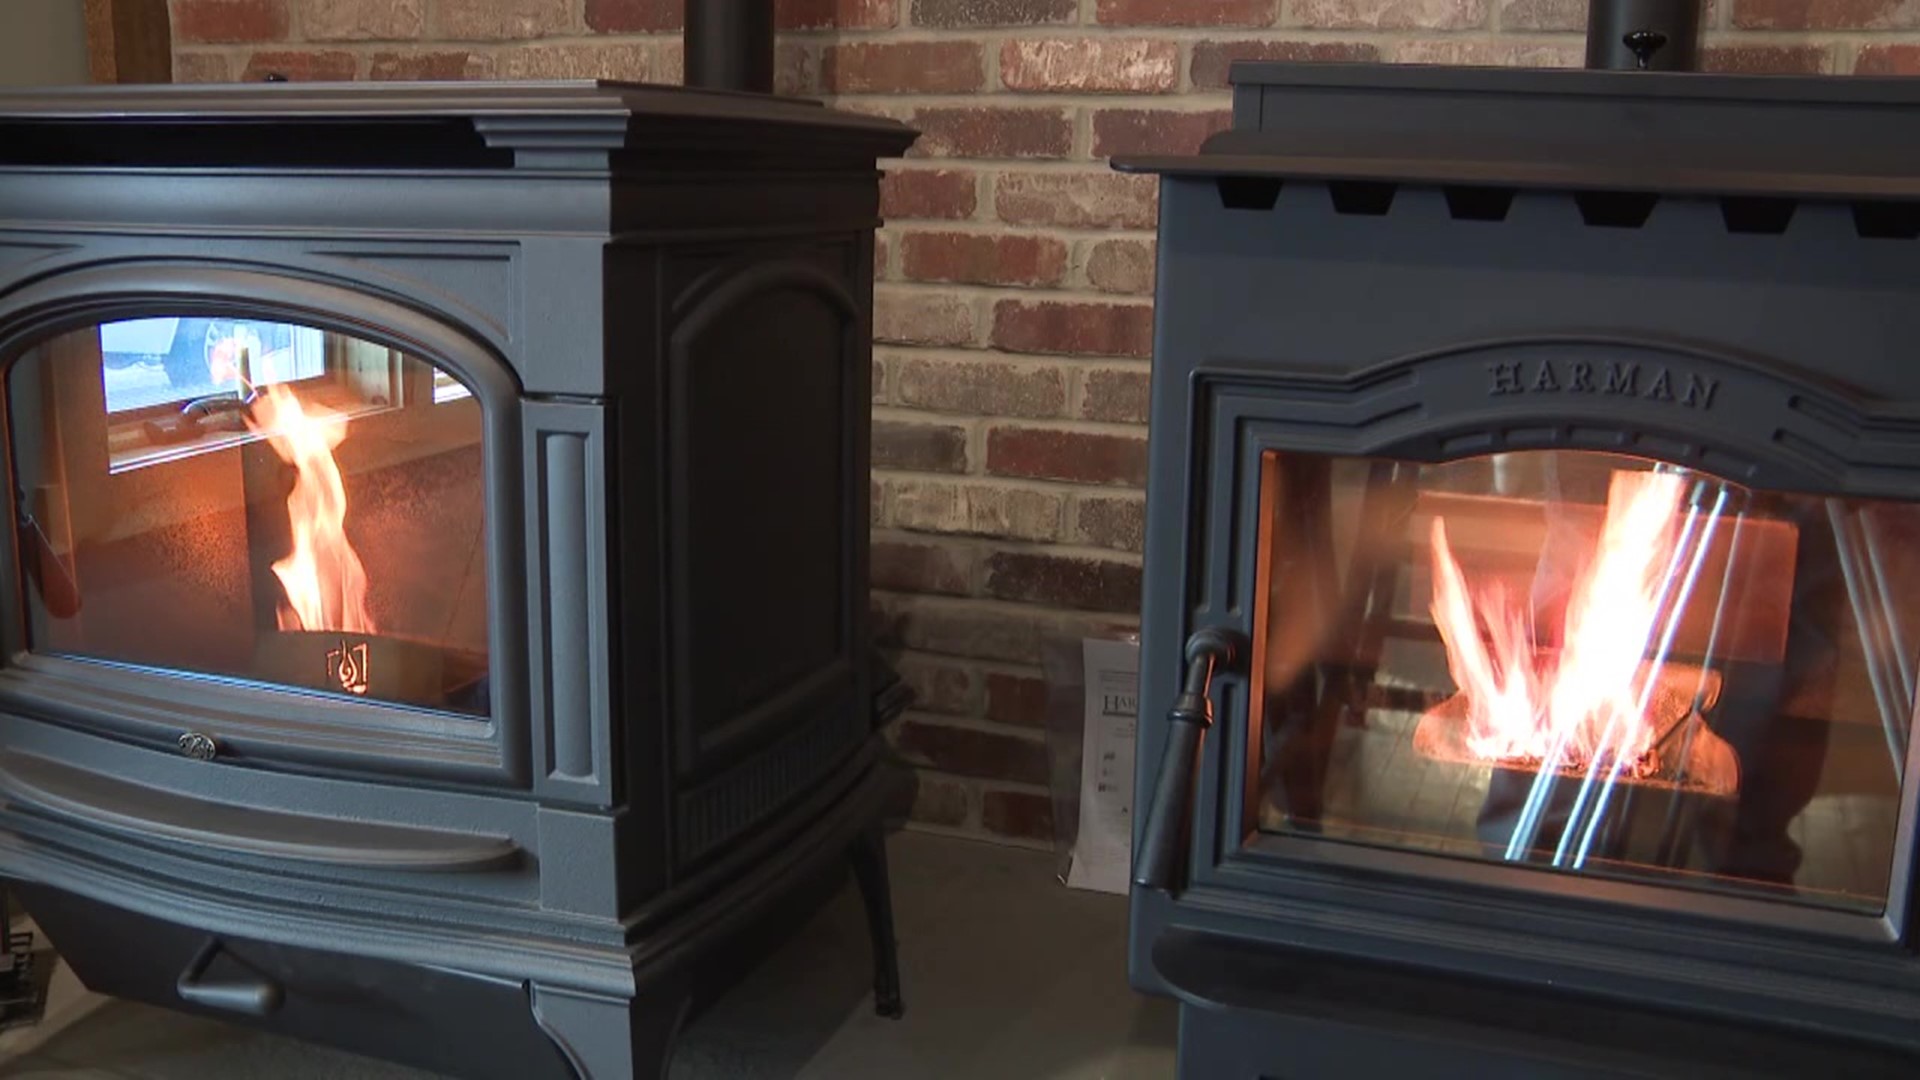 Newswatch 16's Amanda Eustice reports that many are switching over to wood-burning stoves to keep cozy this winter.